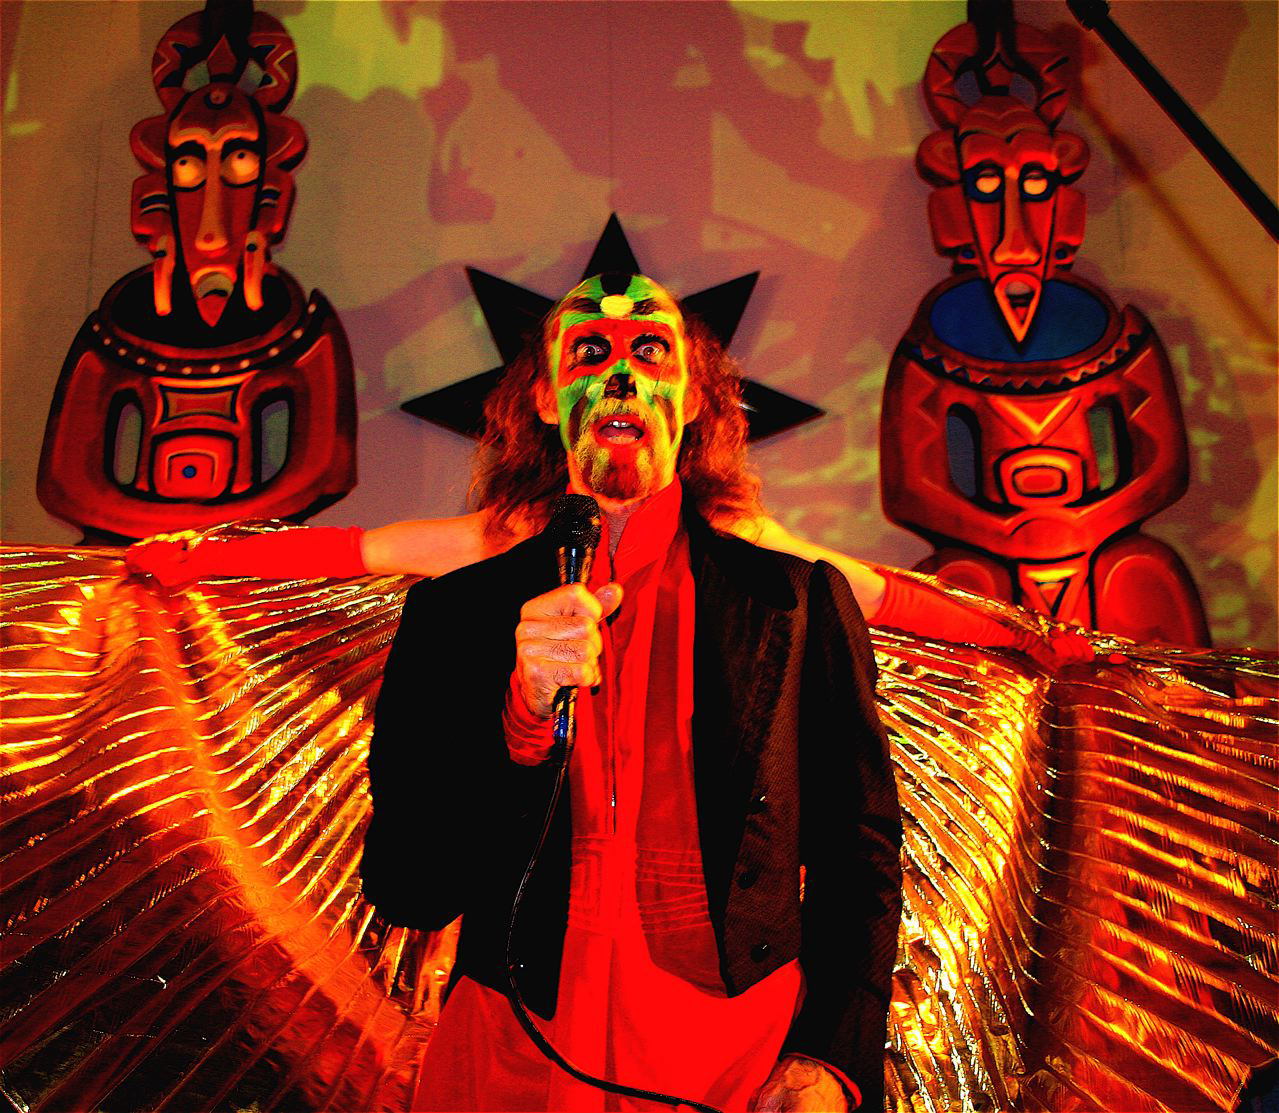 The Crazy World Of Arthur Brown - On Tour